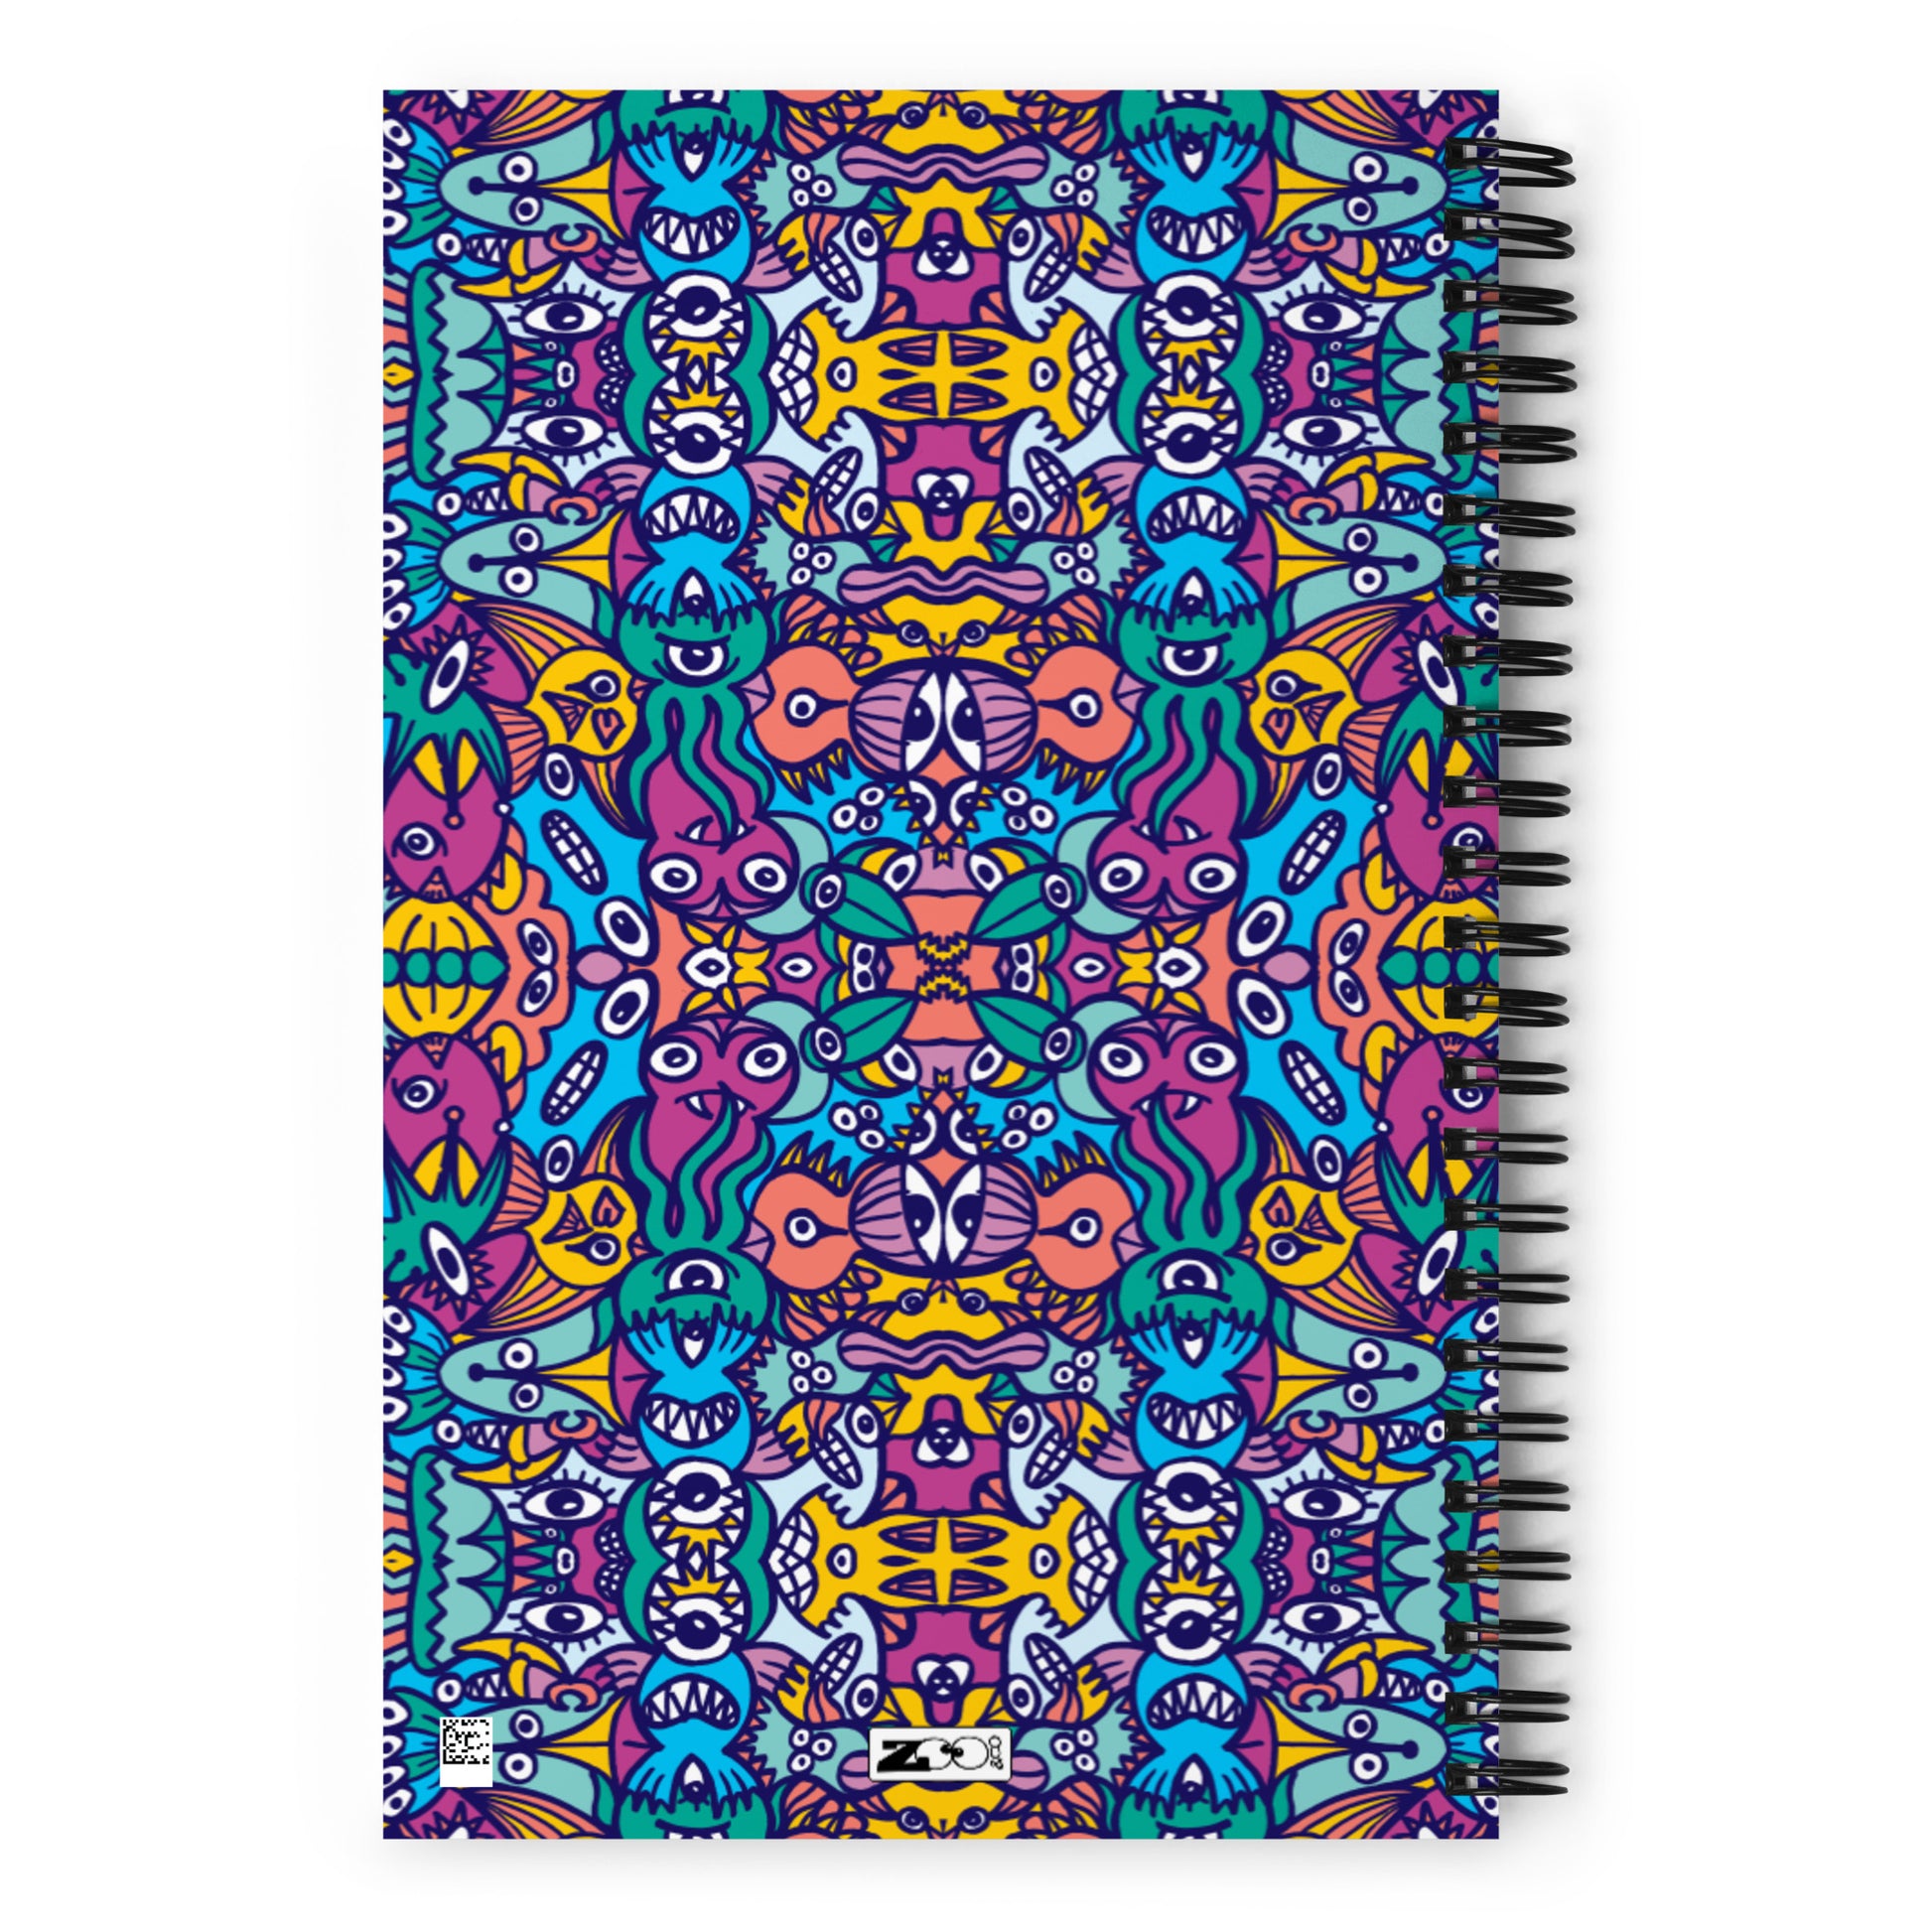 Whimsical design featuring multicolor critters from another world Spiral notebook. Back view